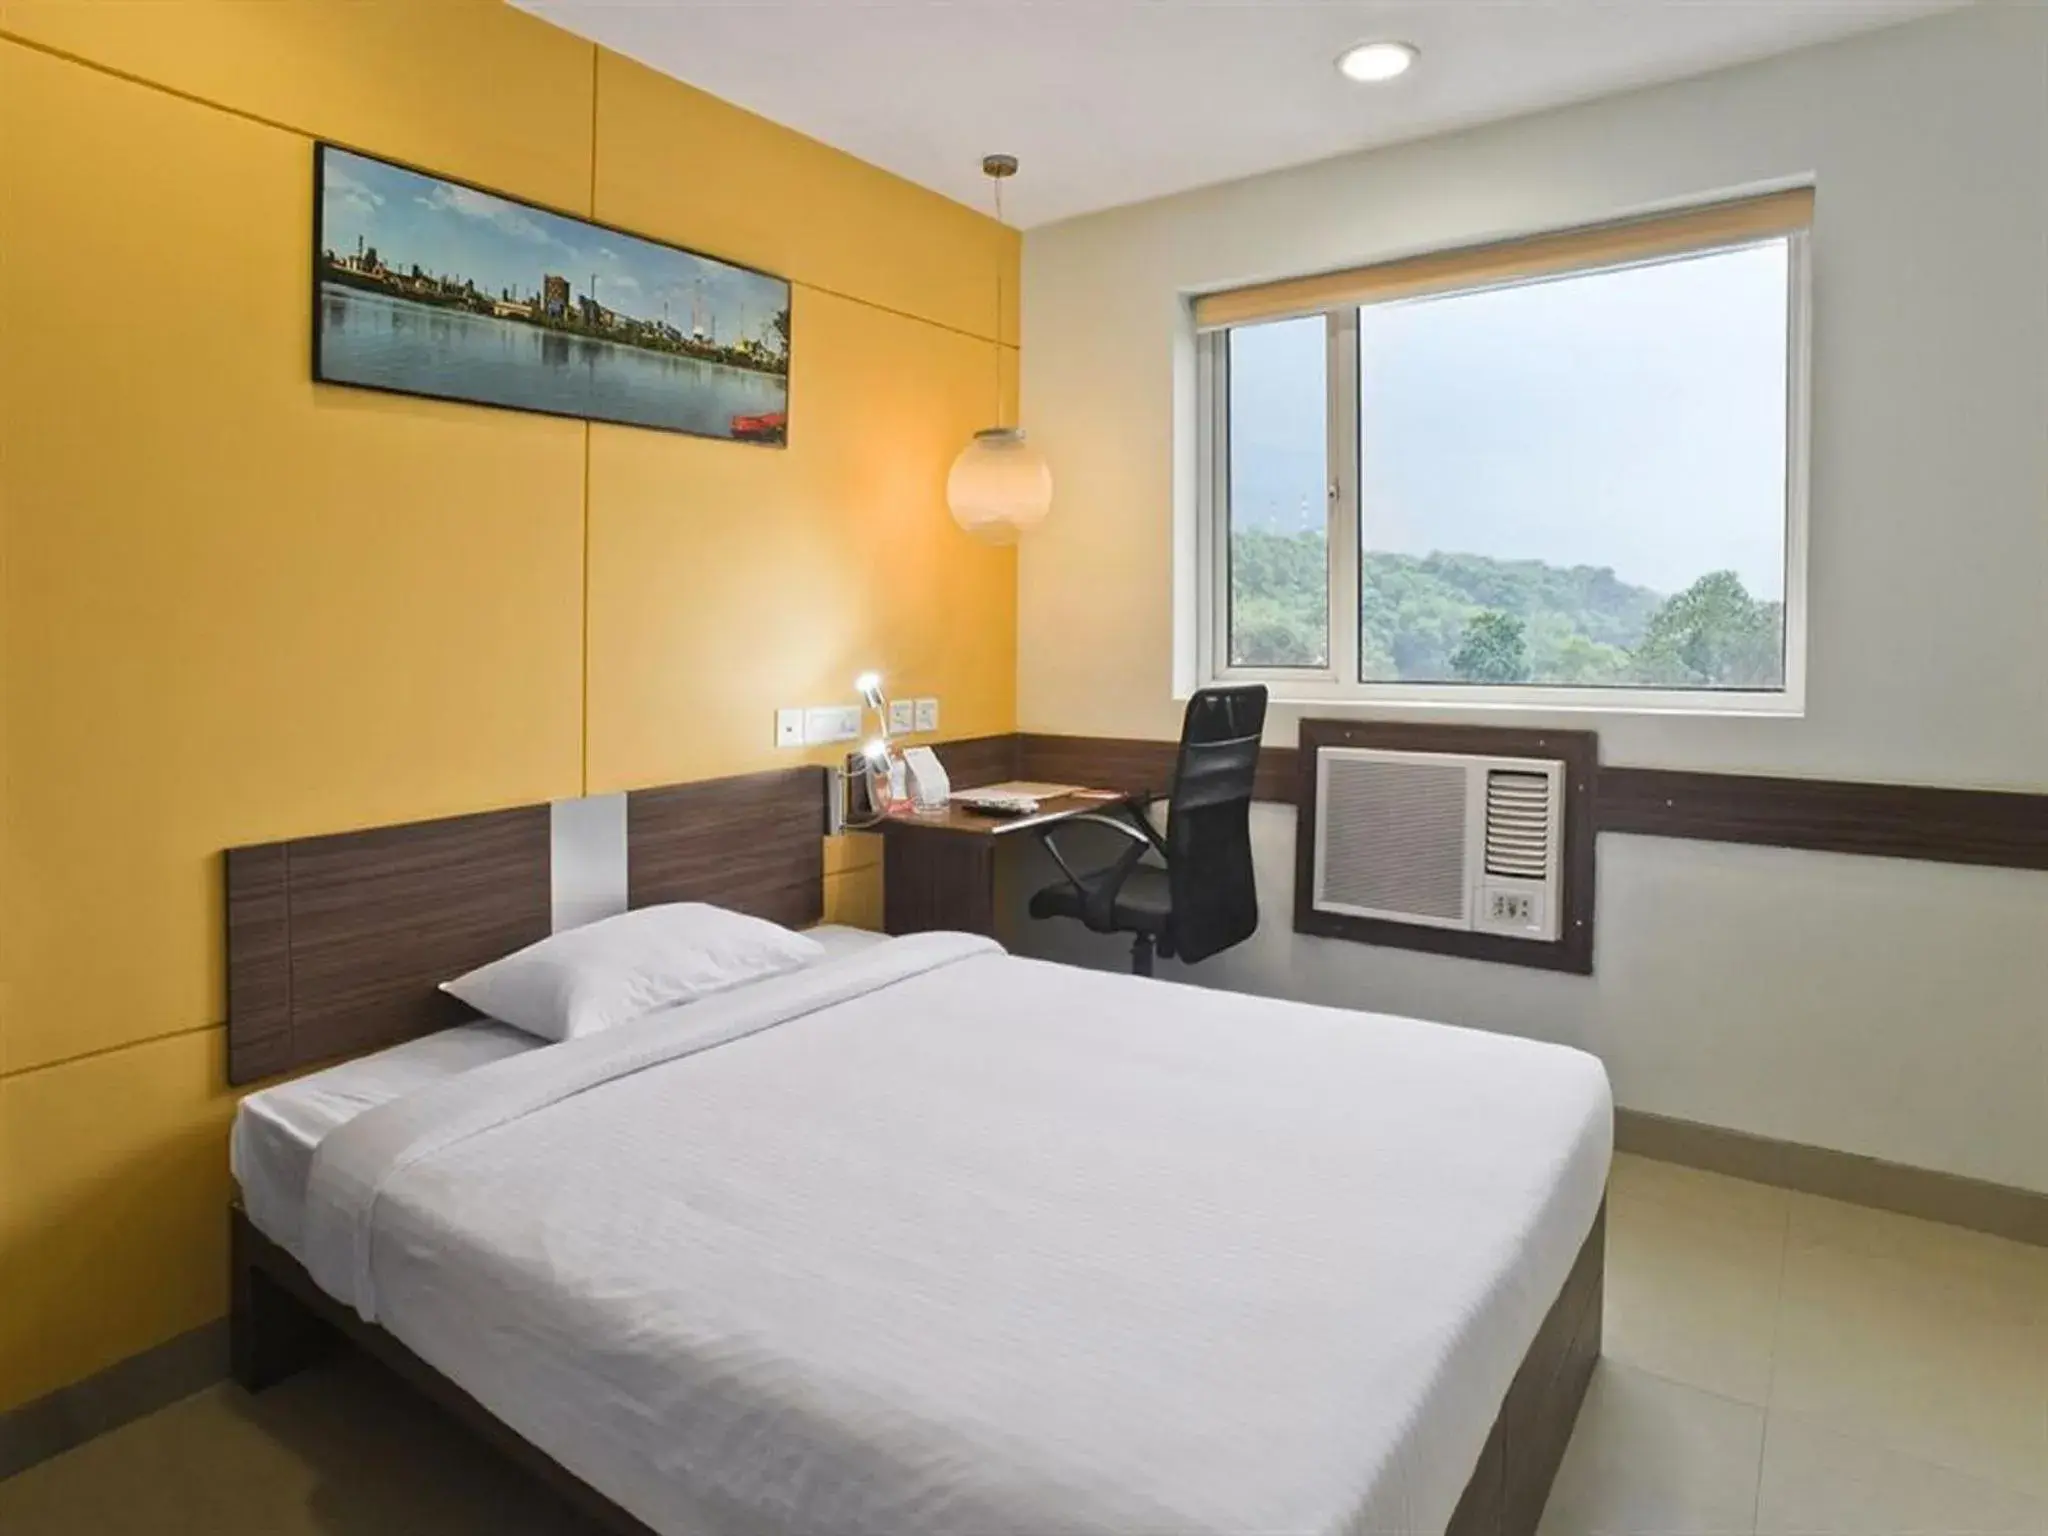 Bed, Room Photo in Ginger Faridabad